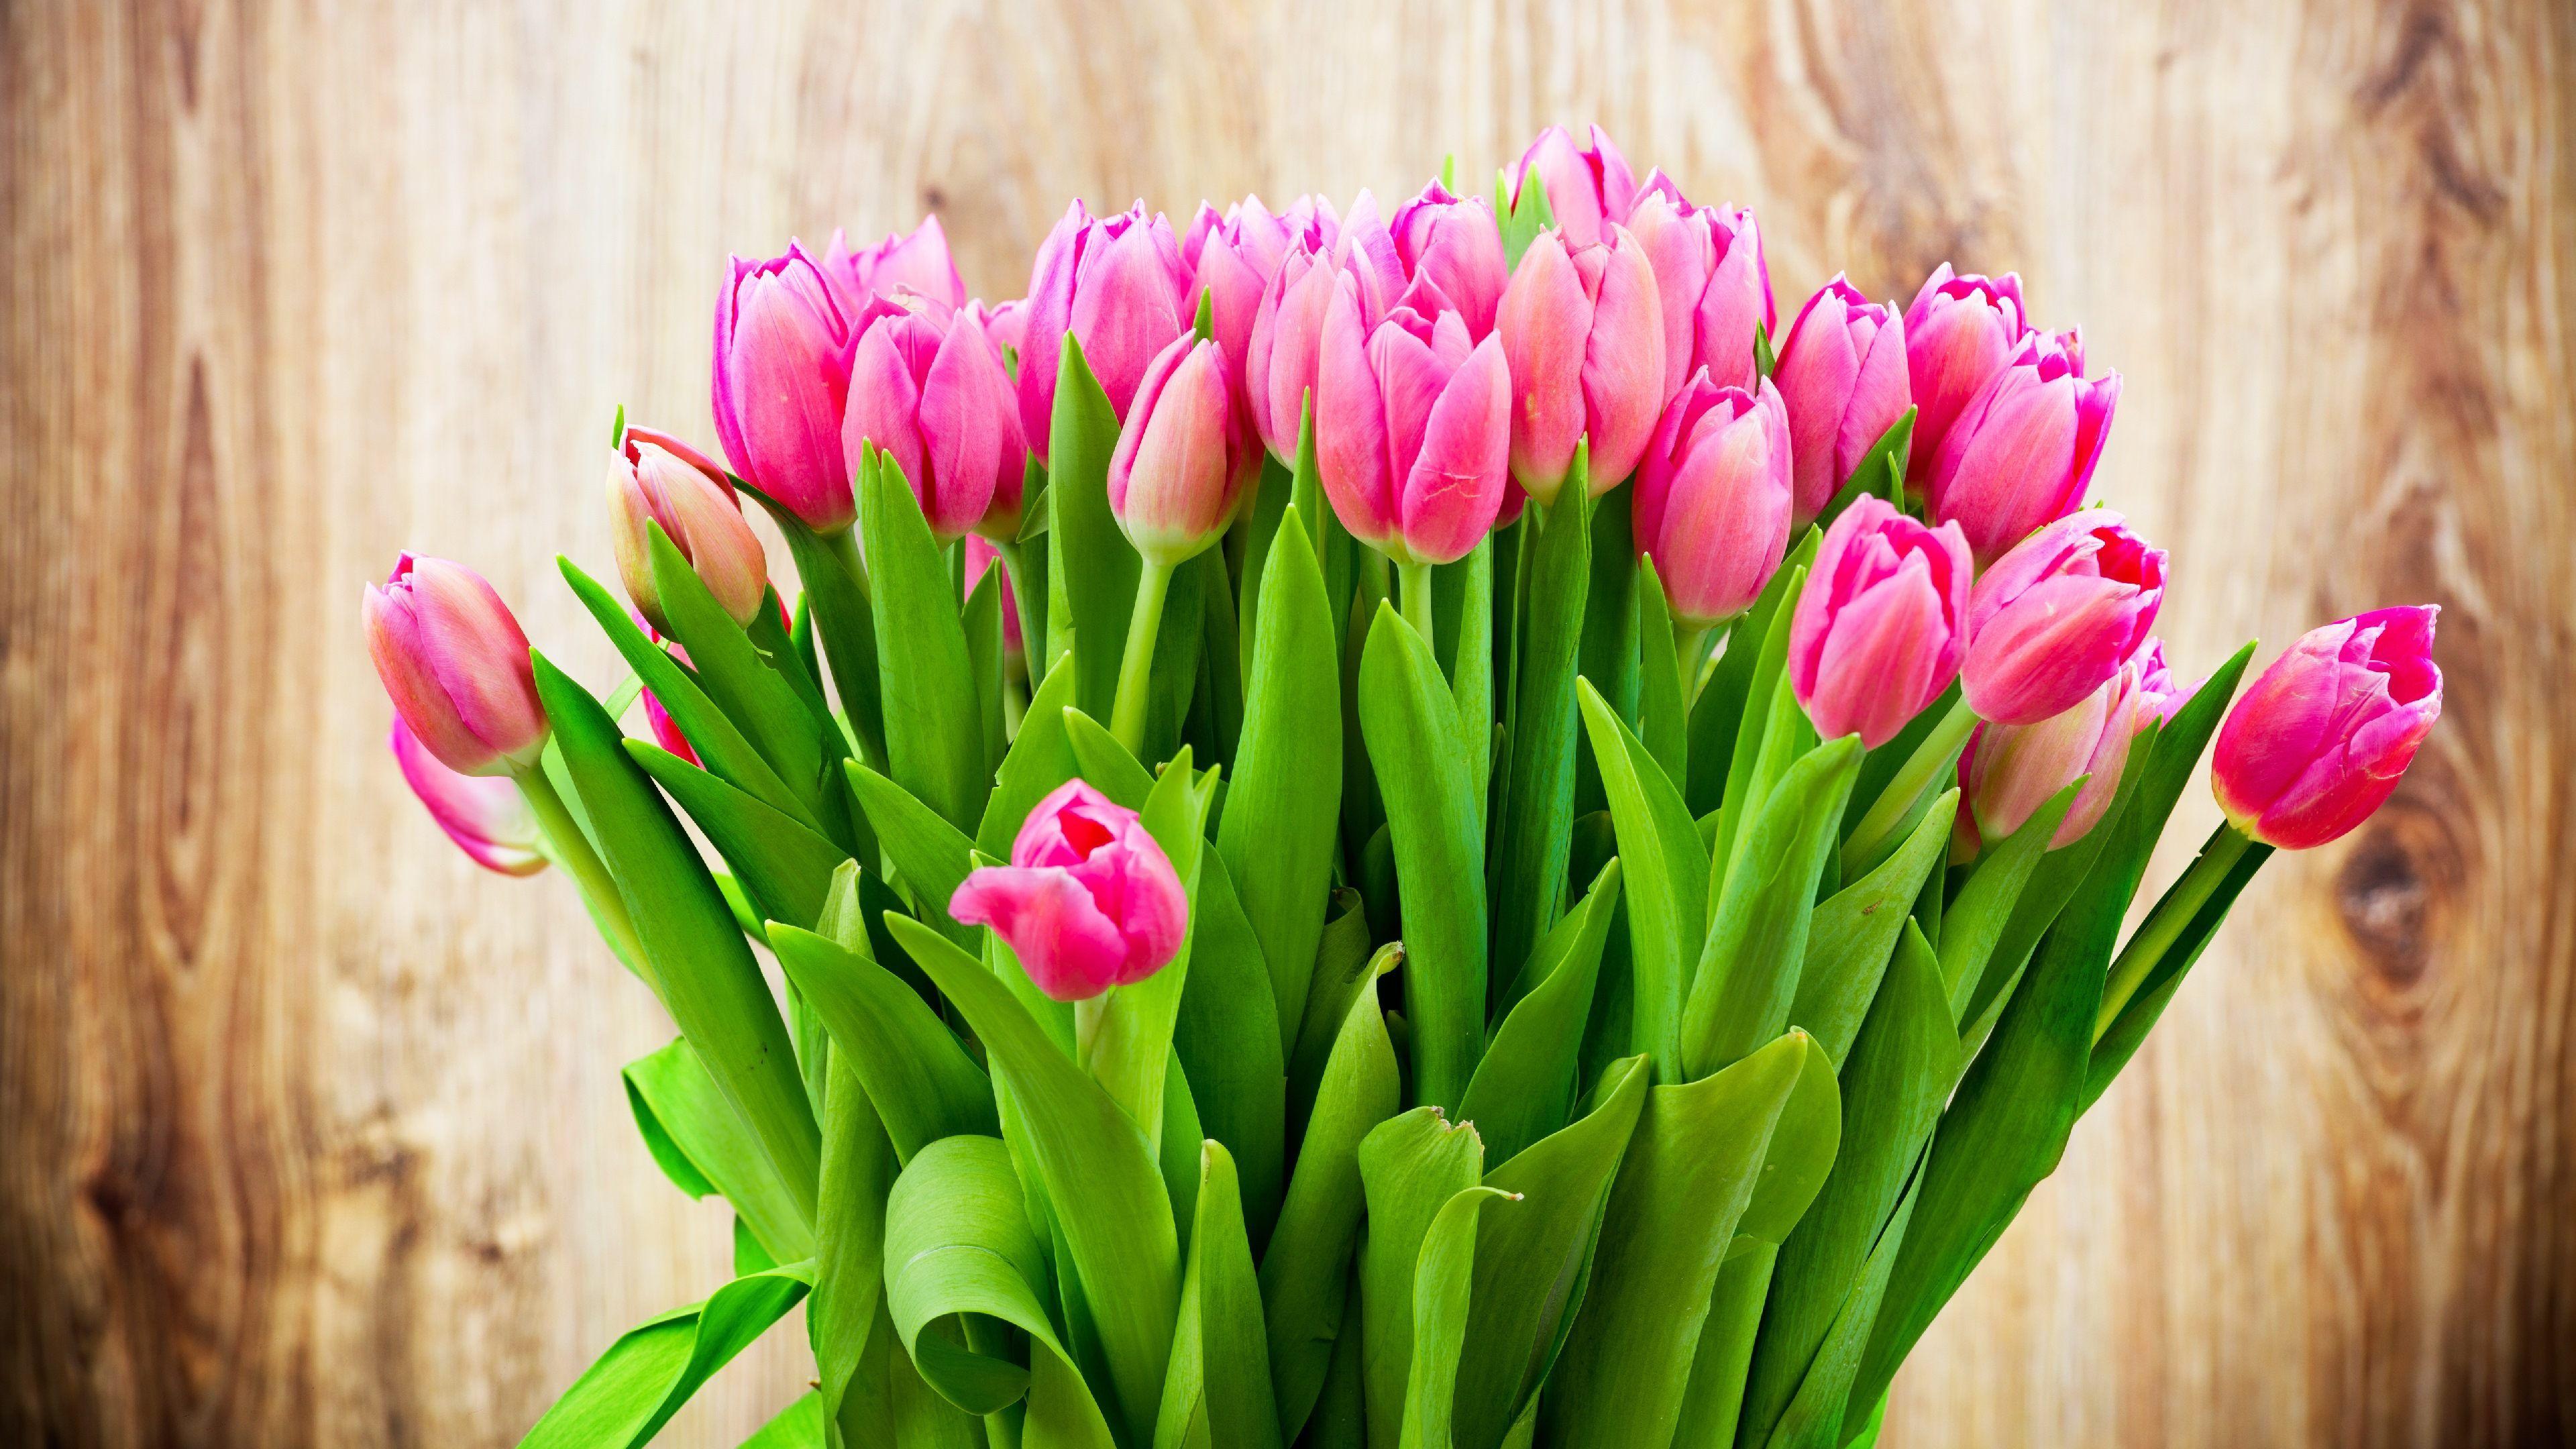 Purple And Pink Tulips Wallpaper High Quality Resolution